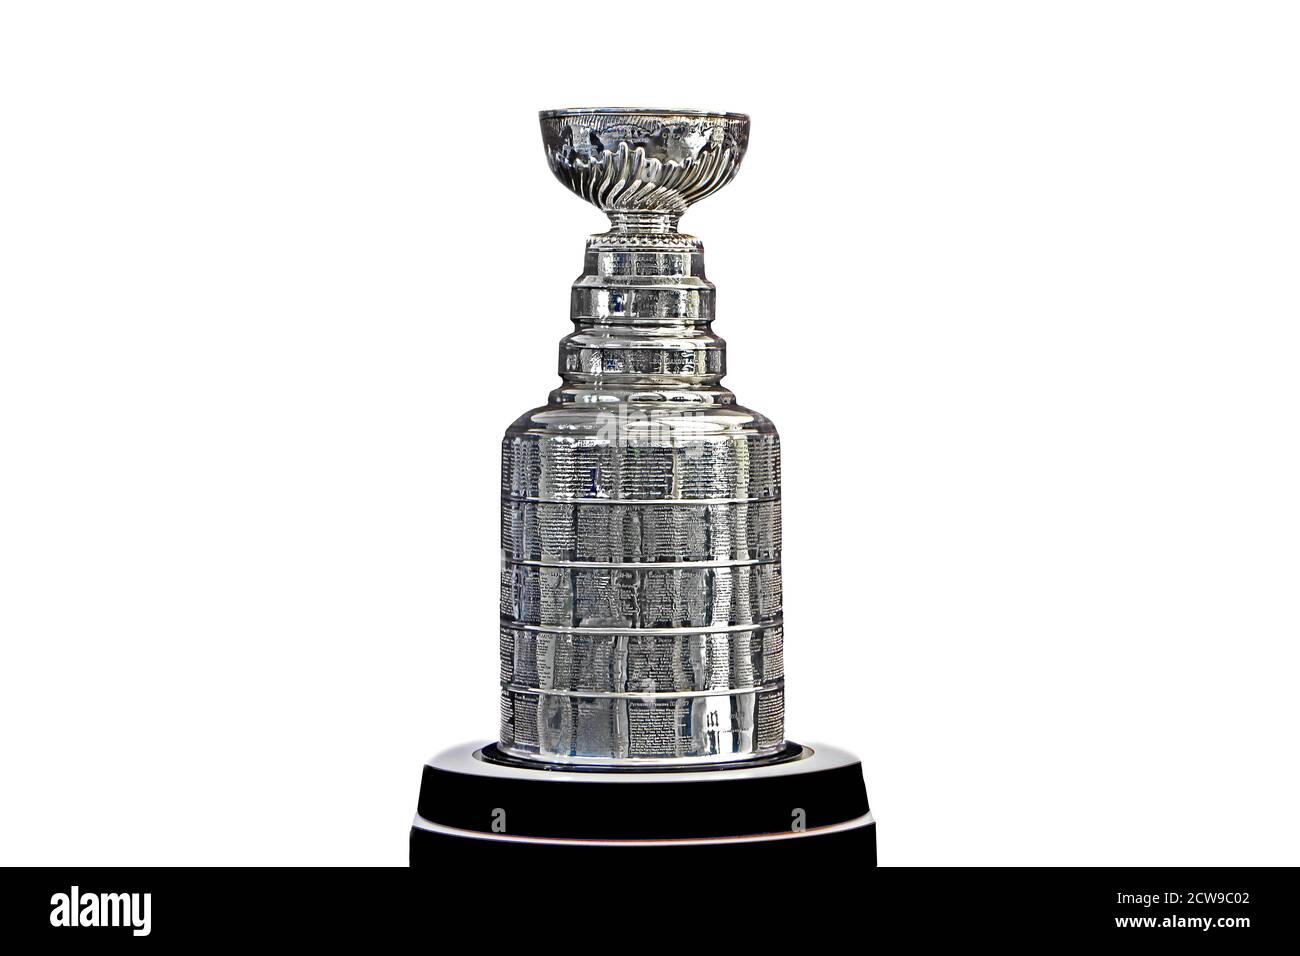 NHL Ceremony - Stanley cup trophy on the black stand, white background, Vancouver BC - October 22, 2017. Stock Photo